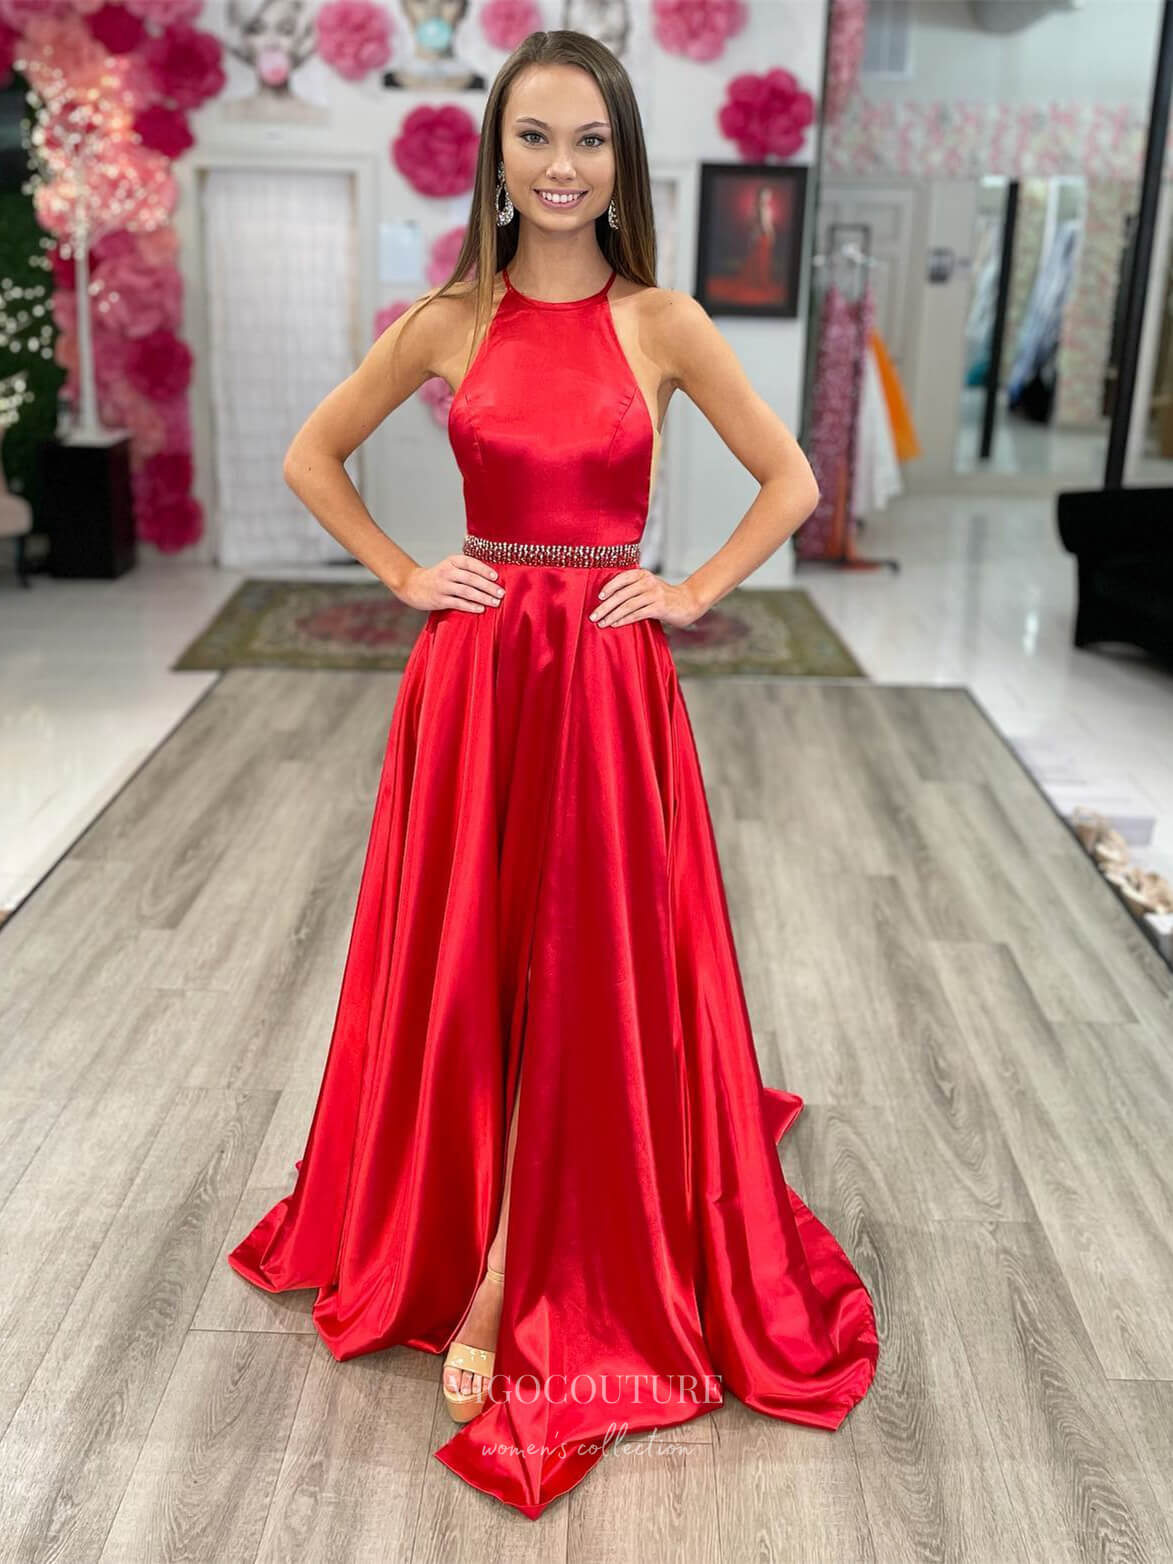 Red Satin Removable Cape Prom Dresses with Slit Halter Neck Beaded Waist 24143-Prom Dresses-vigocouture-Red-Custom Size-vigocouture